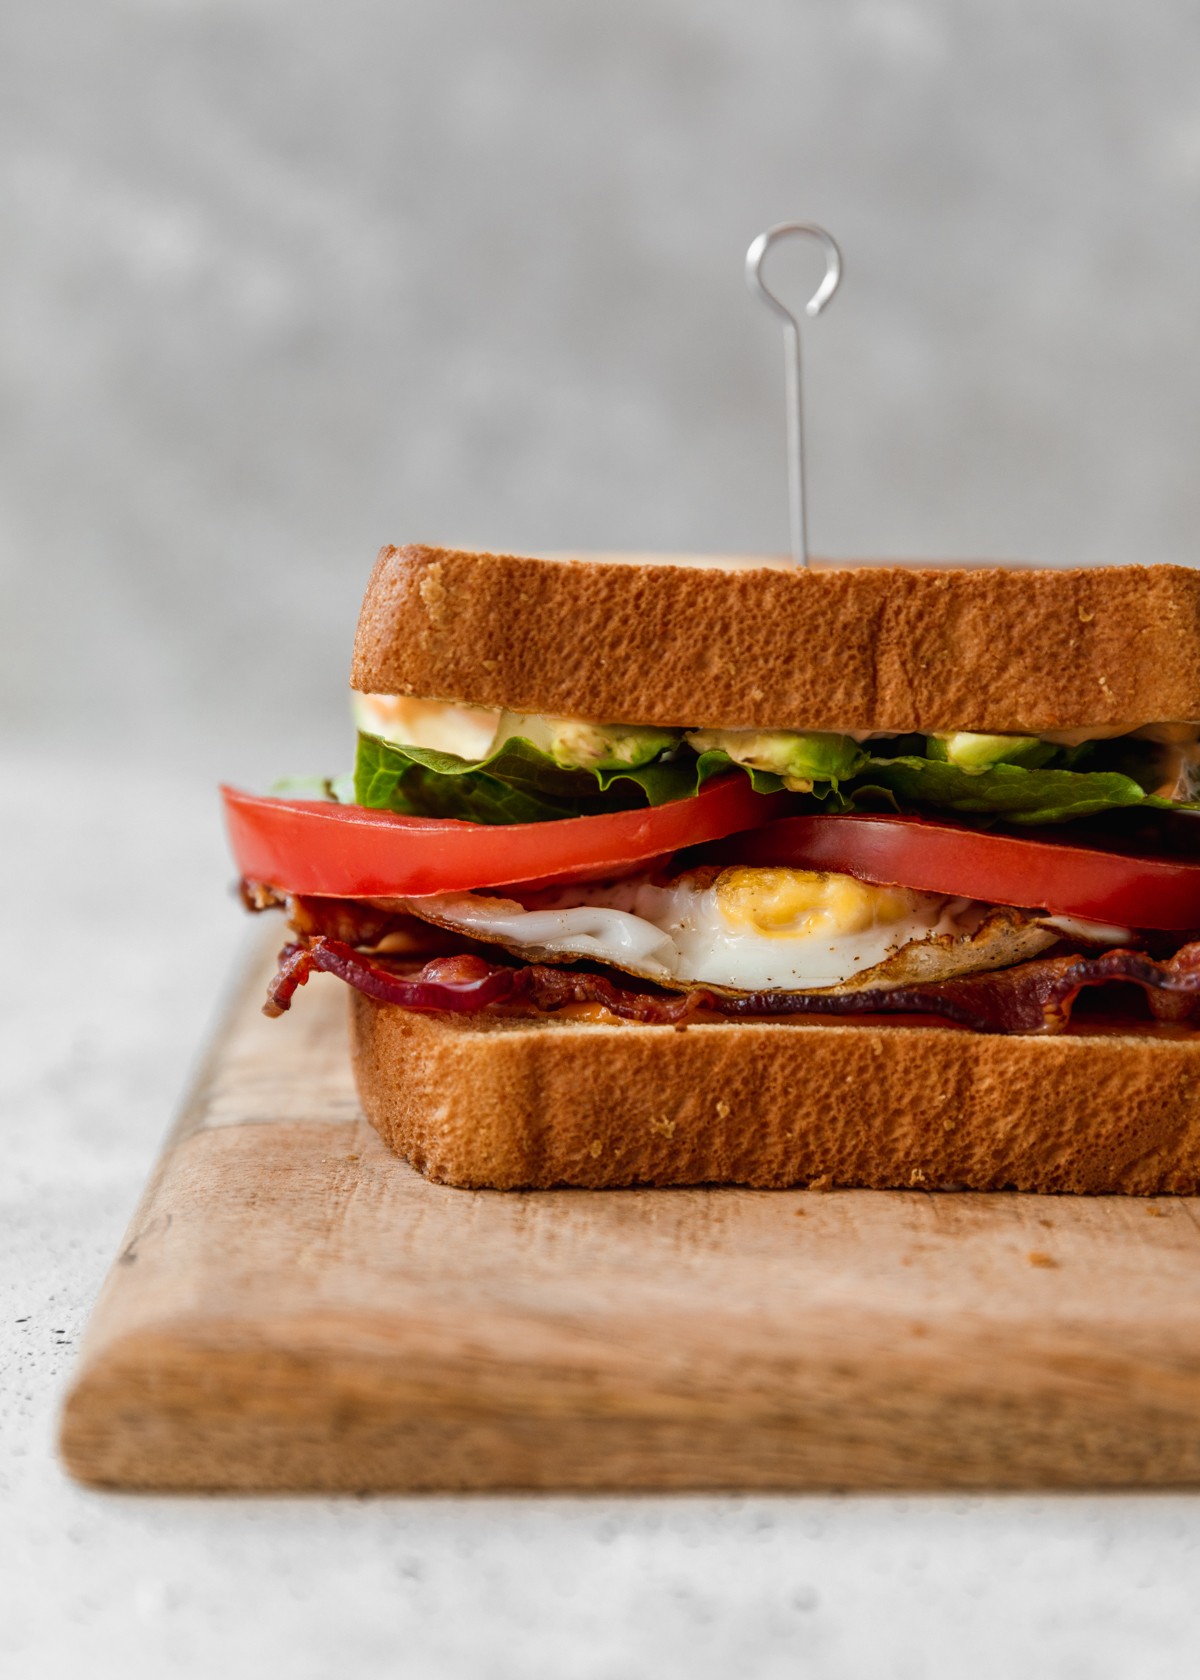 A very close up side image of a sandwich with bacon, lettuce, tomato, an egg, and avocado on a wood board with a grey background.